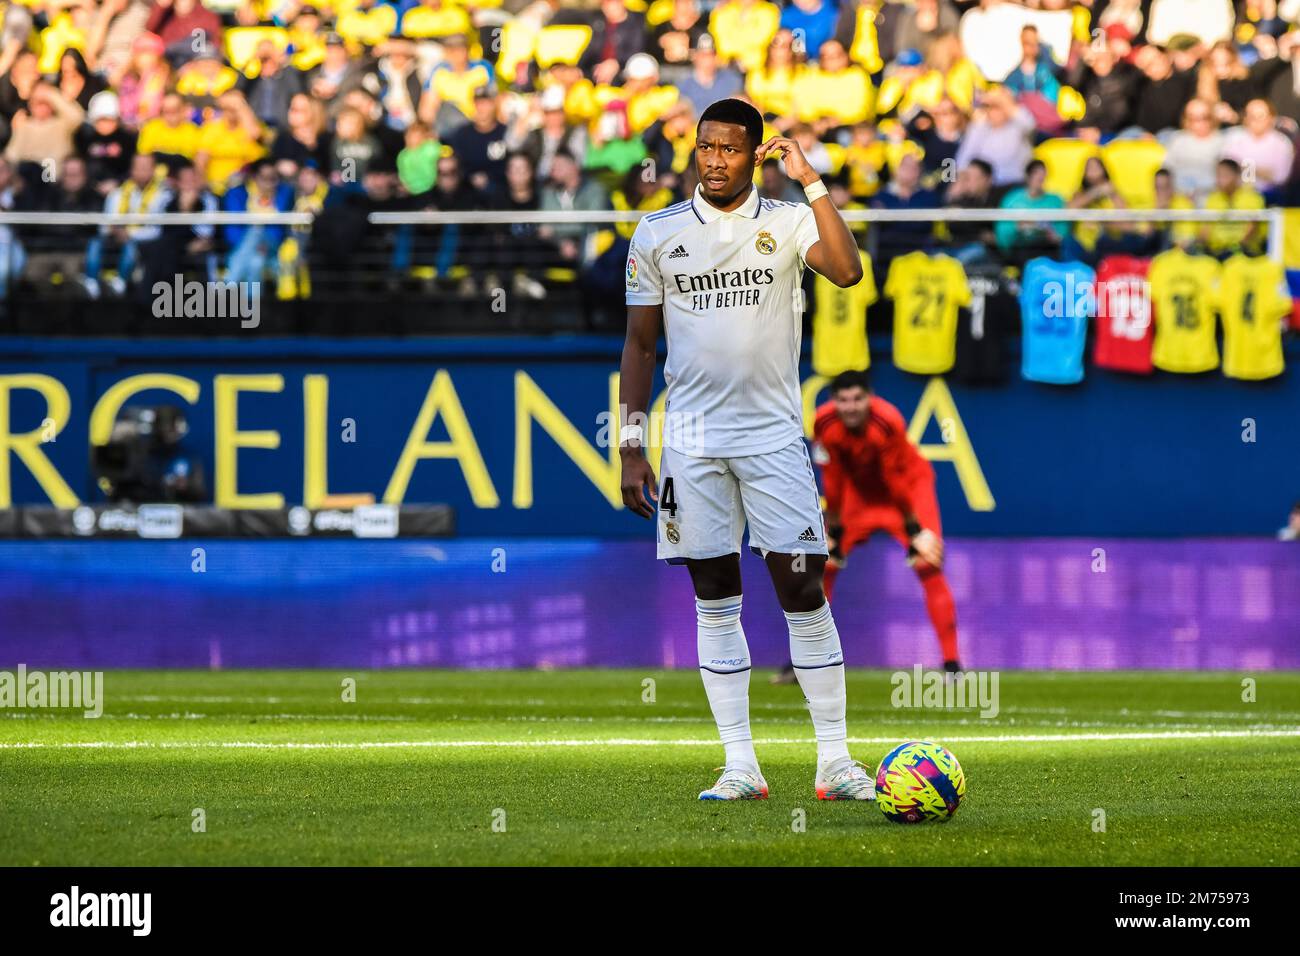 VILLARREAL, SPAIN - JANUARY 7: David Alaba of Real Madrid CF shooting a fault during the match between Villarreal CF and Real Madrid CF of La Liga Santander on January 7, 2023 at Estadi de la Ceramica in Villarreal, Spain. (Photo by Samuel Carreño/ PX Images) Credit: Px Images/Alamy Live News Stock Photo